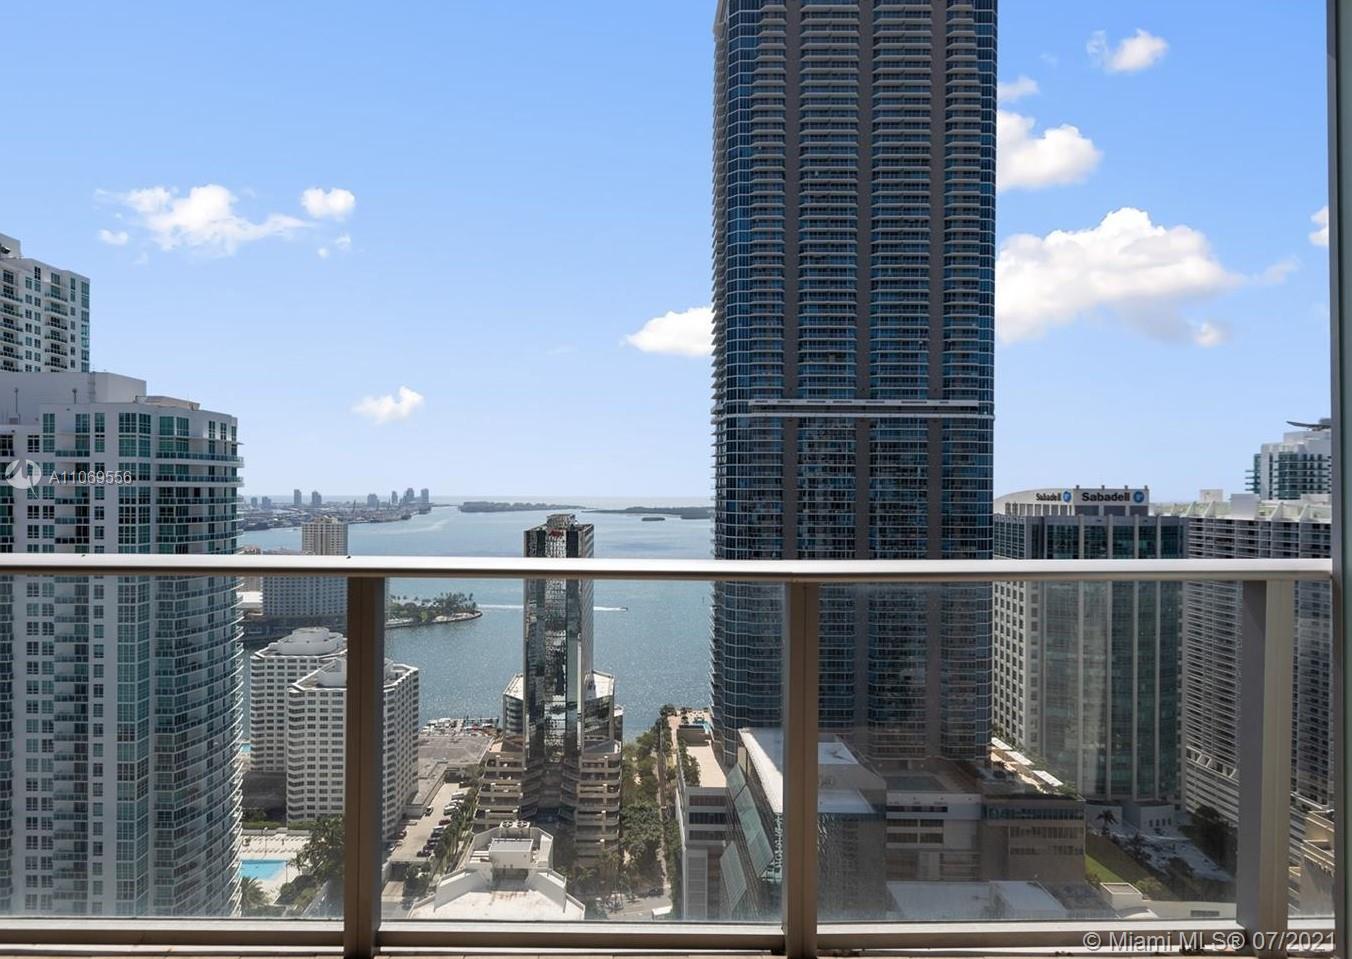 Incredible unit at 35th floor with amazing view. Unit with DEN and Private elevator and more. For showing send message listing agent. Lease for $ 4100 expires  September 2022.